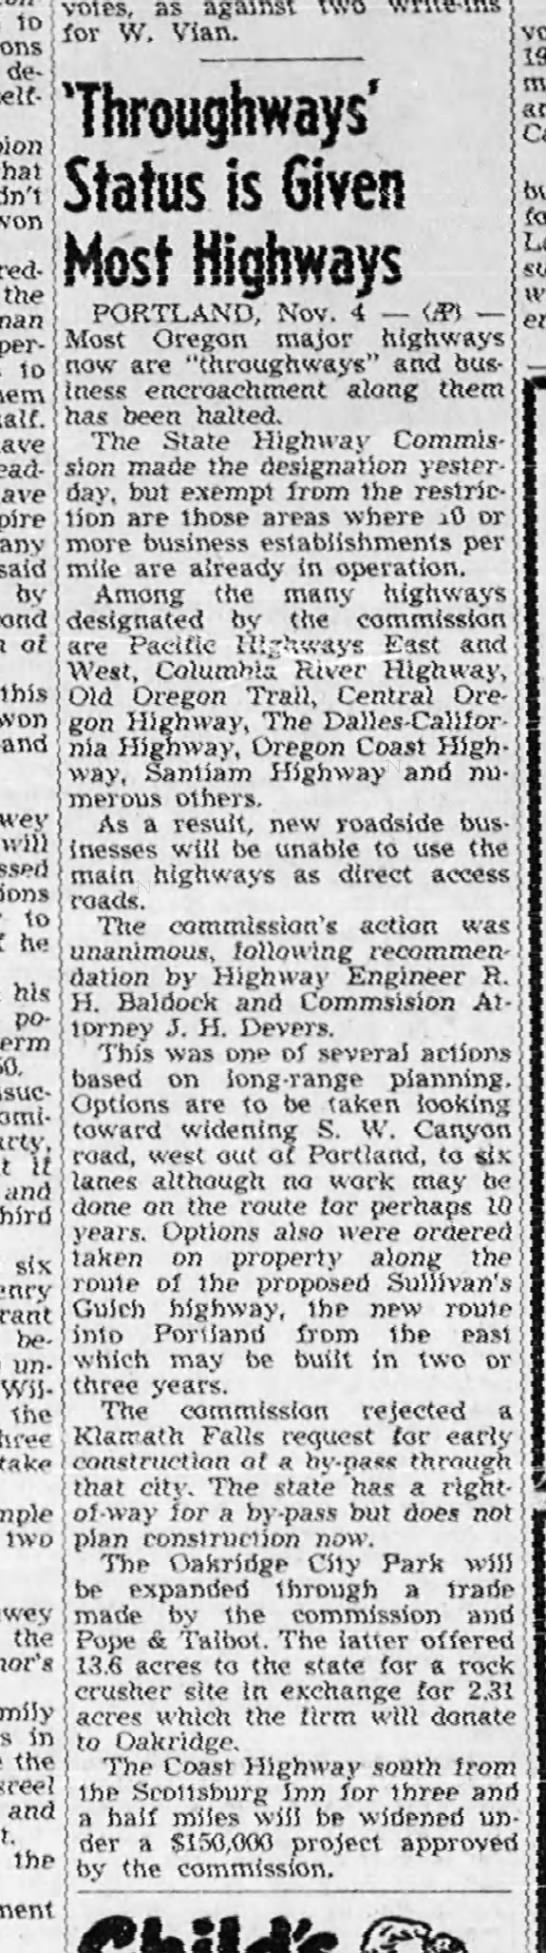 'Throughways' Status is Given Most Highways [OR] - 